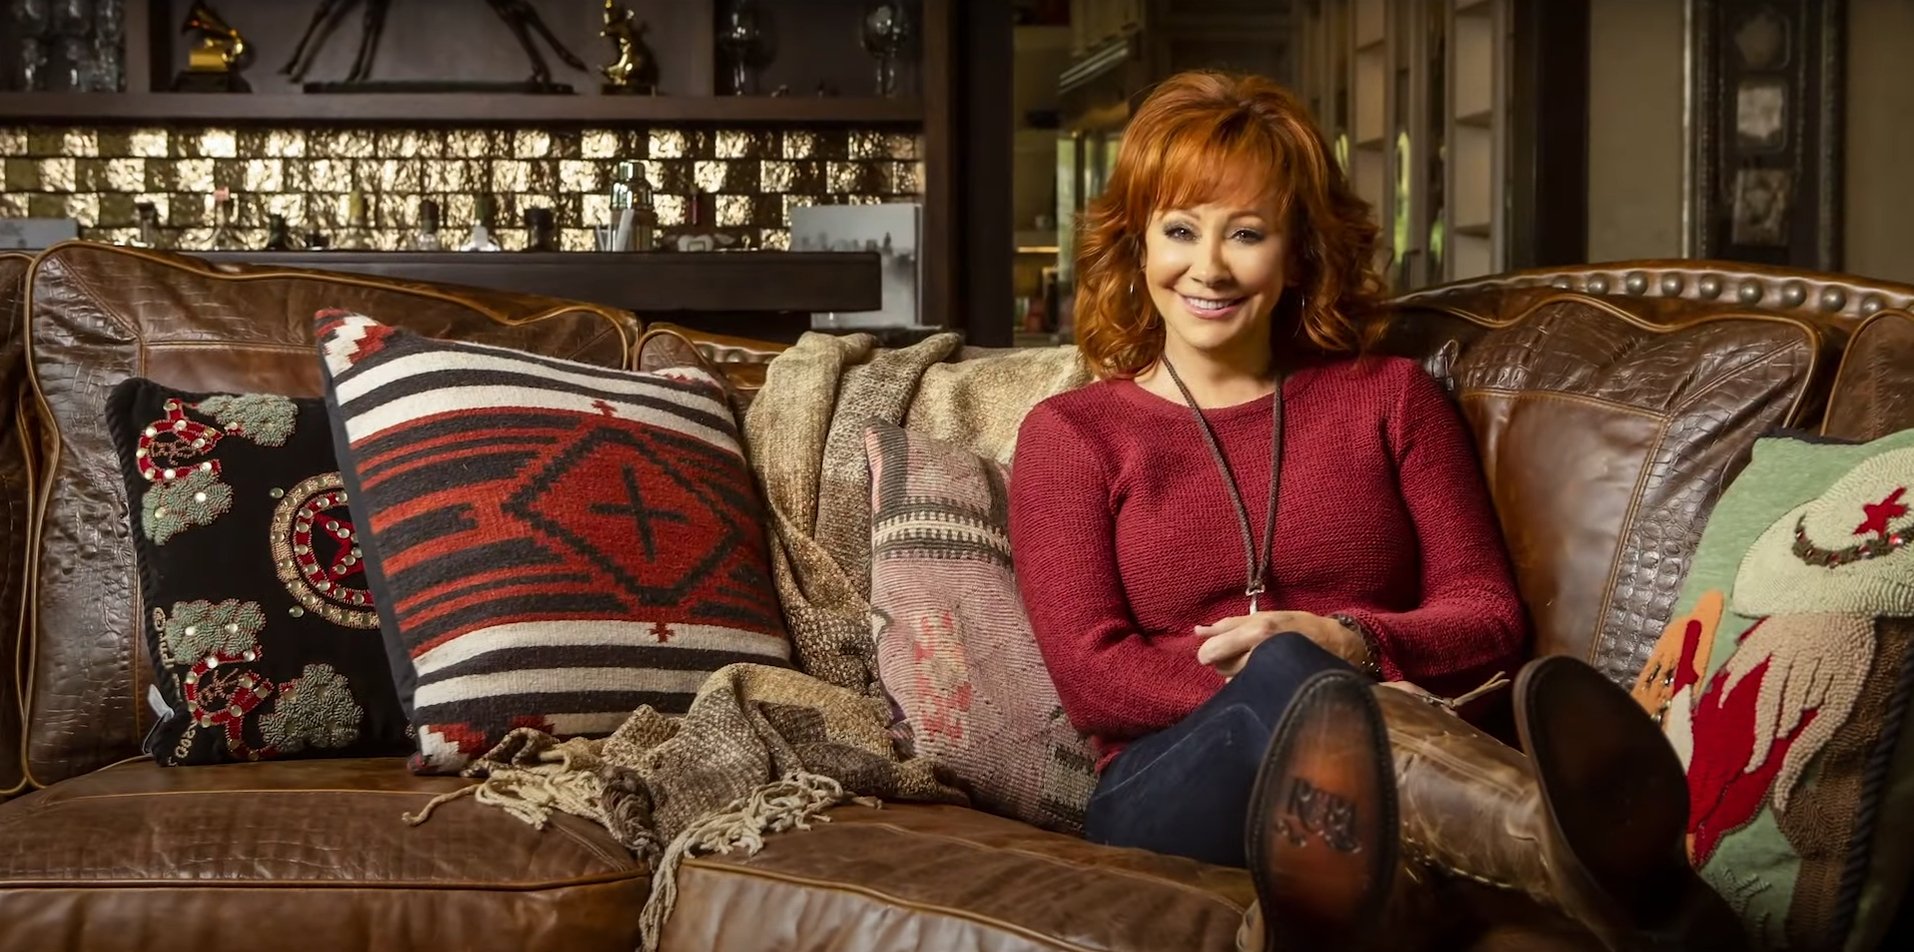 Reba McEntire in her lavish African Cowboy Style Mansion | Photo: YouTube/RebaMcEntire